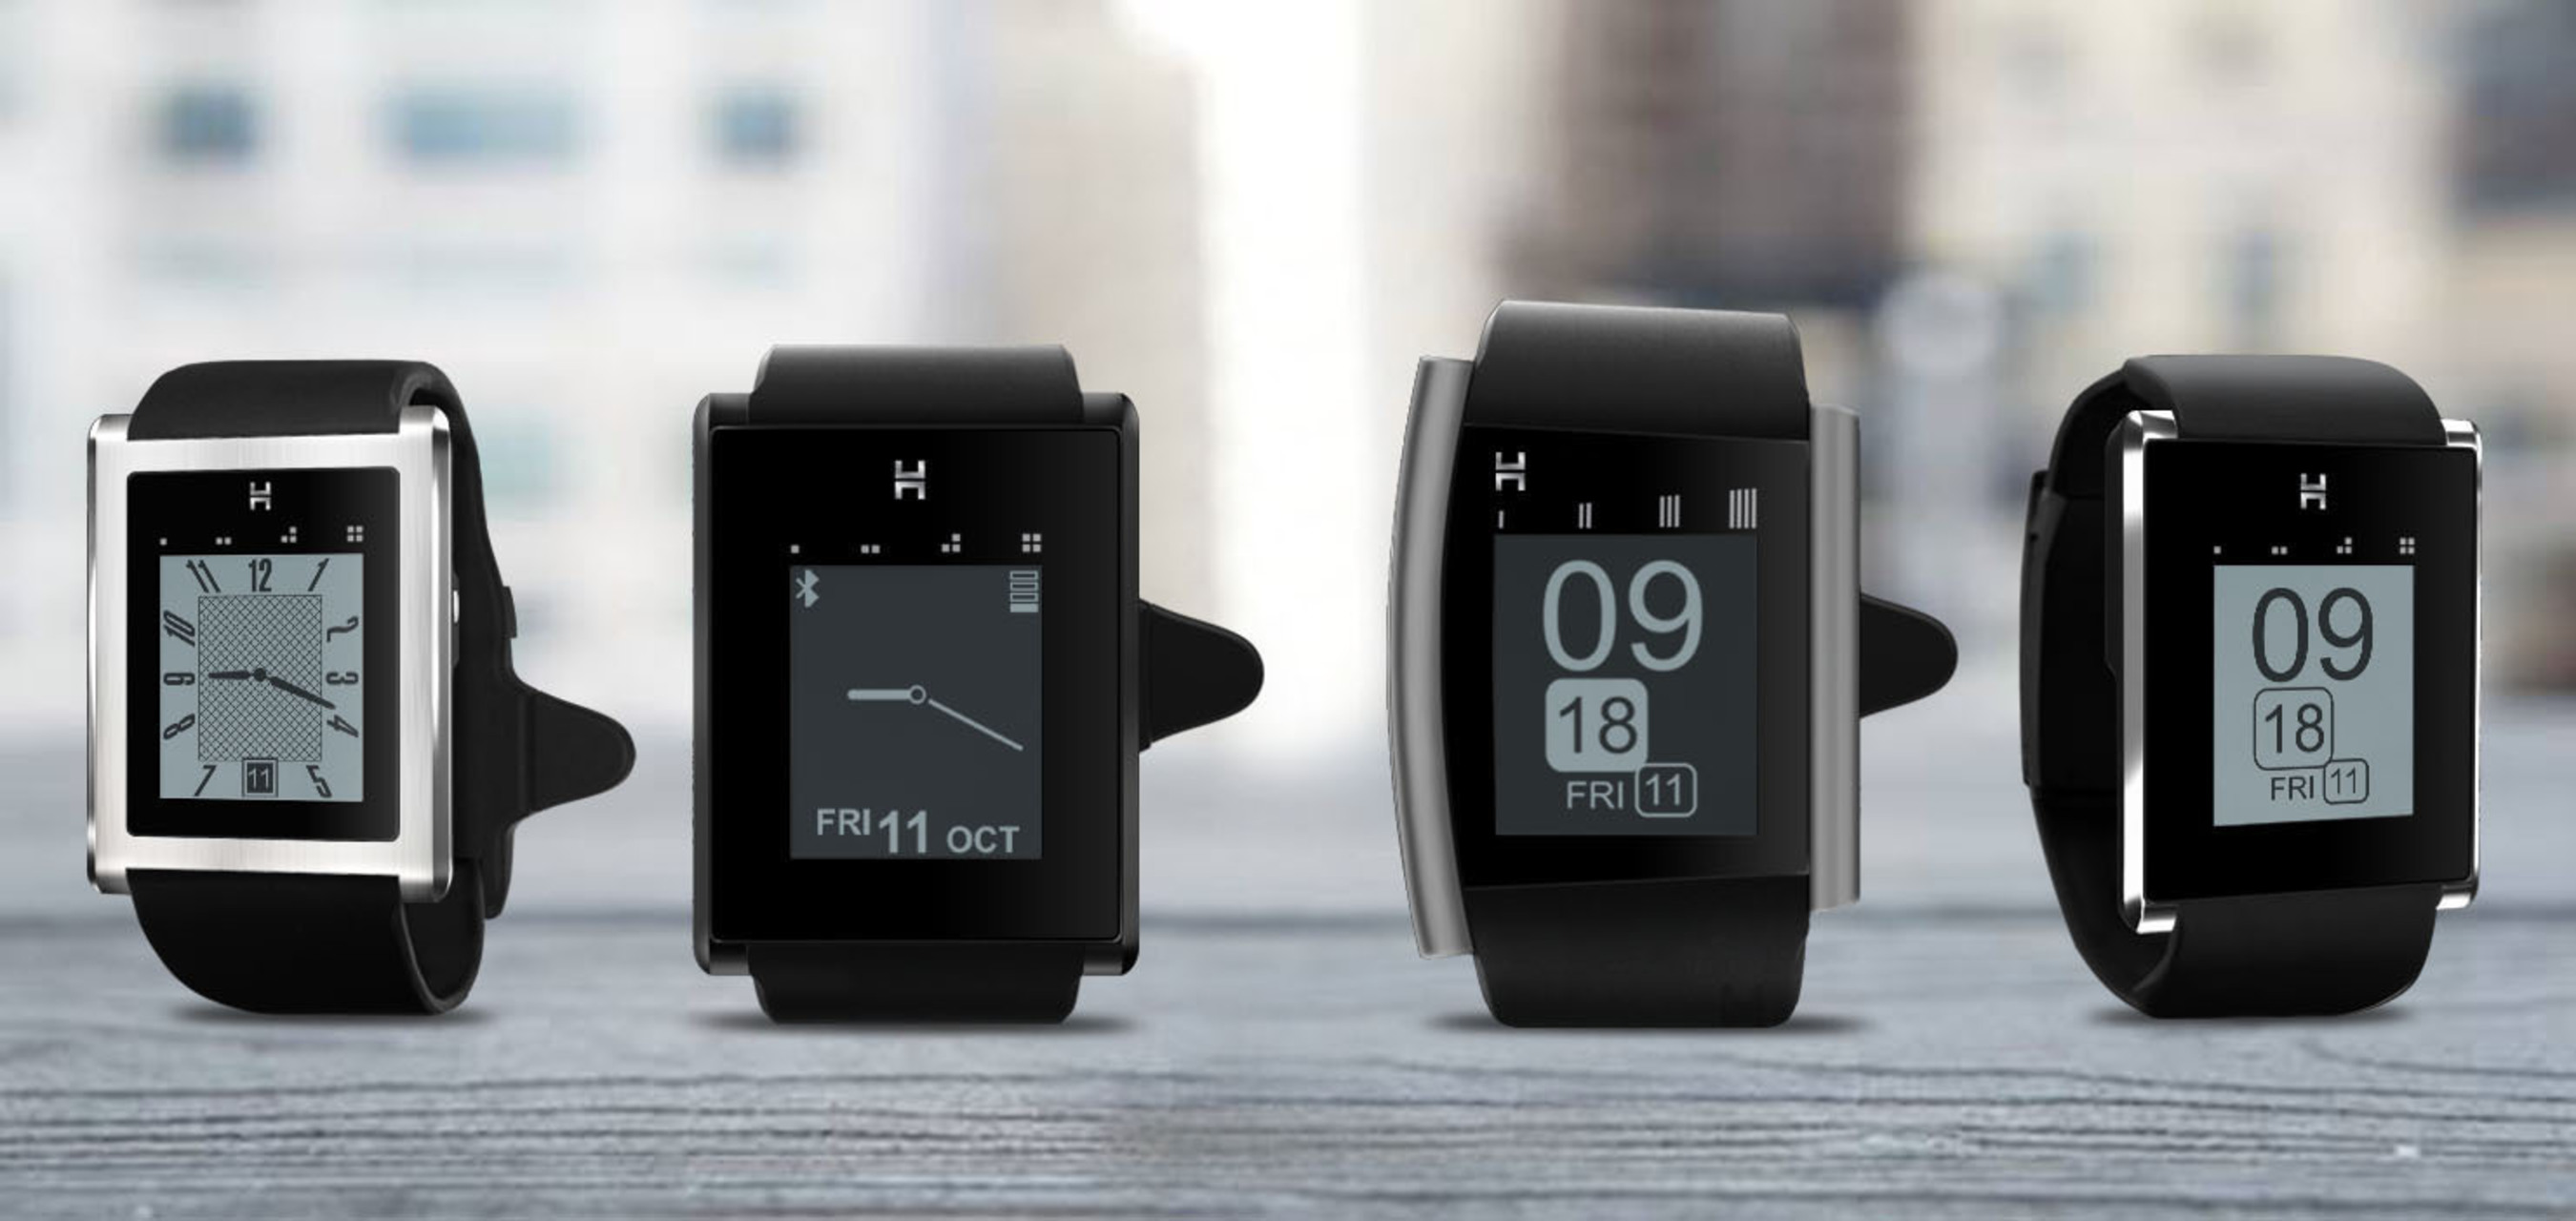 The most innovative Smart Watch is now available on Windows Phone. (PRNewsFoto/PH Technical Labs) (PRNewsFoto/PH TECHNICAL LABS)